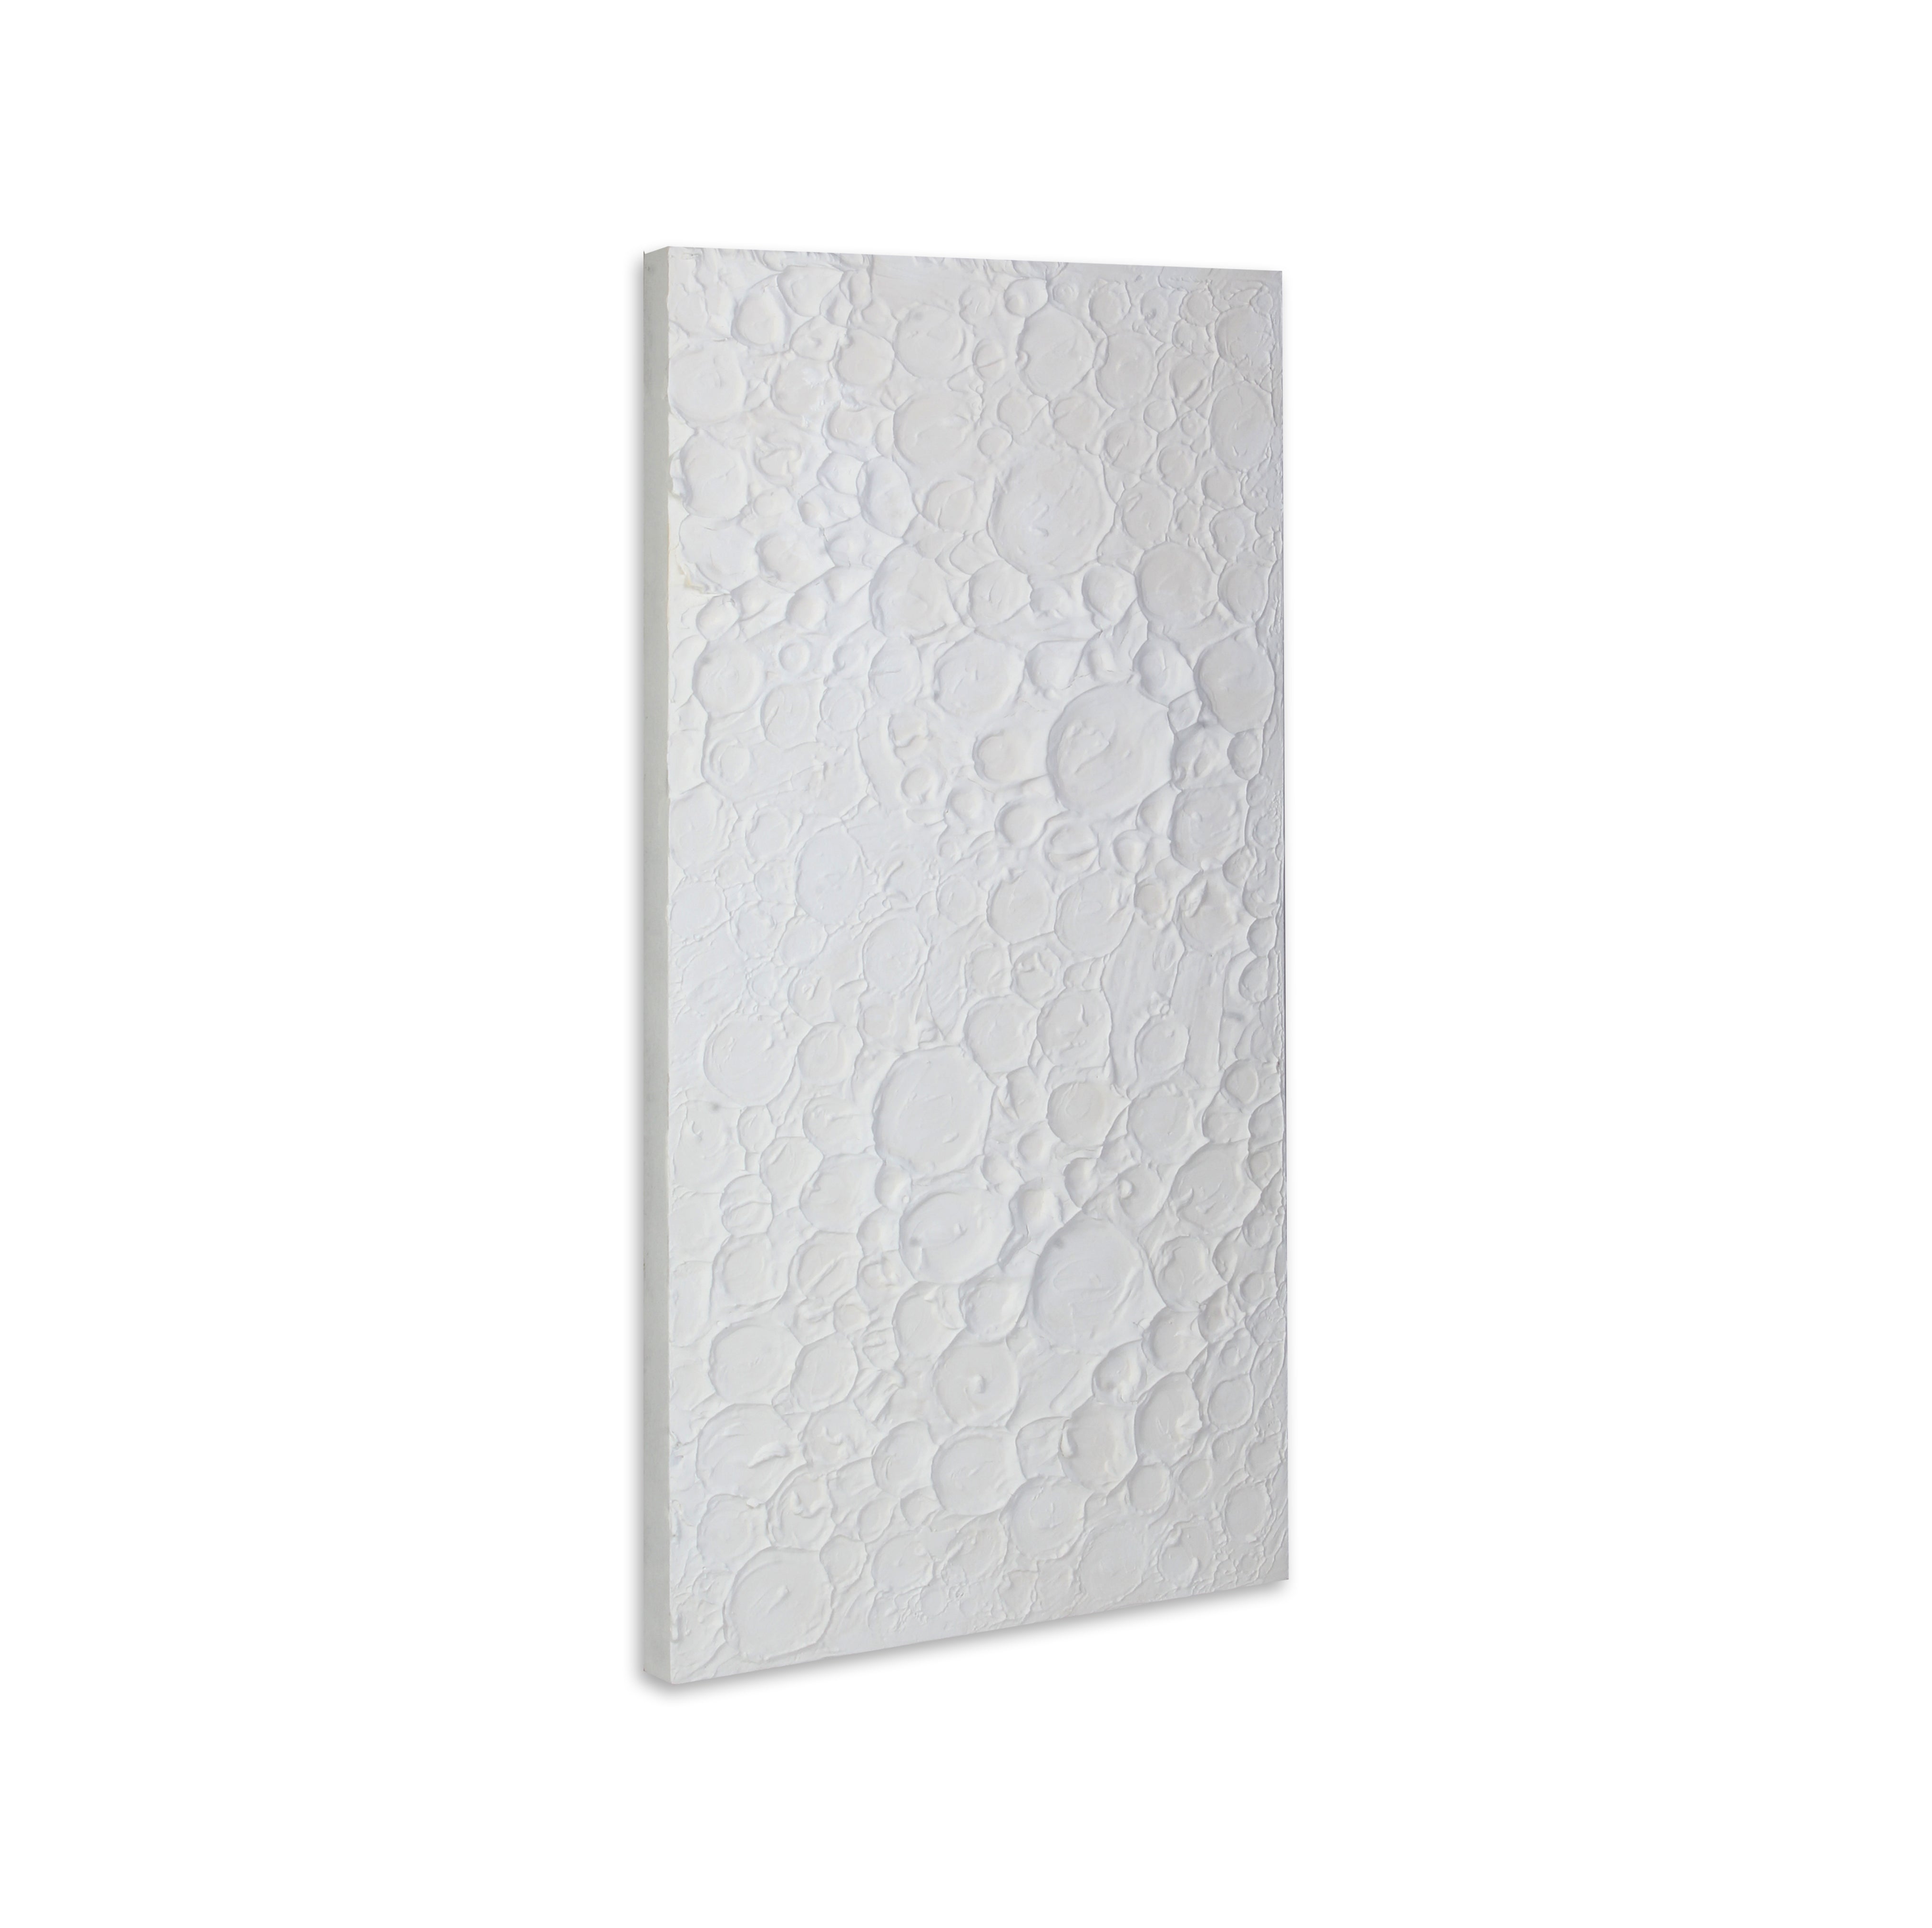 Wall Decor Moon Surface Approx H24 X L12 X D0.78inch 1pc